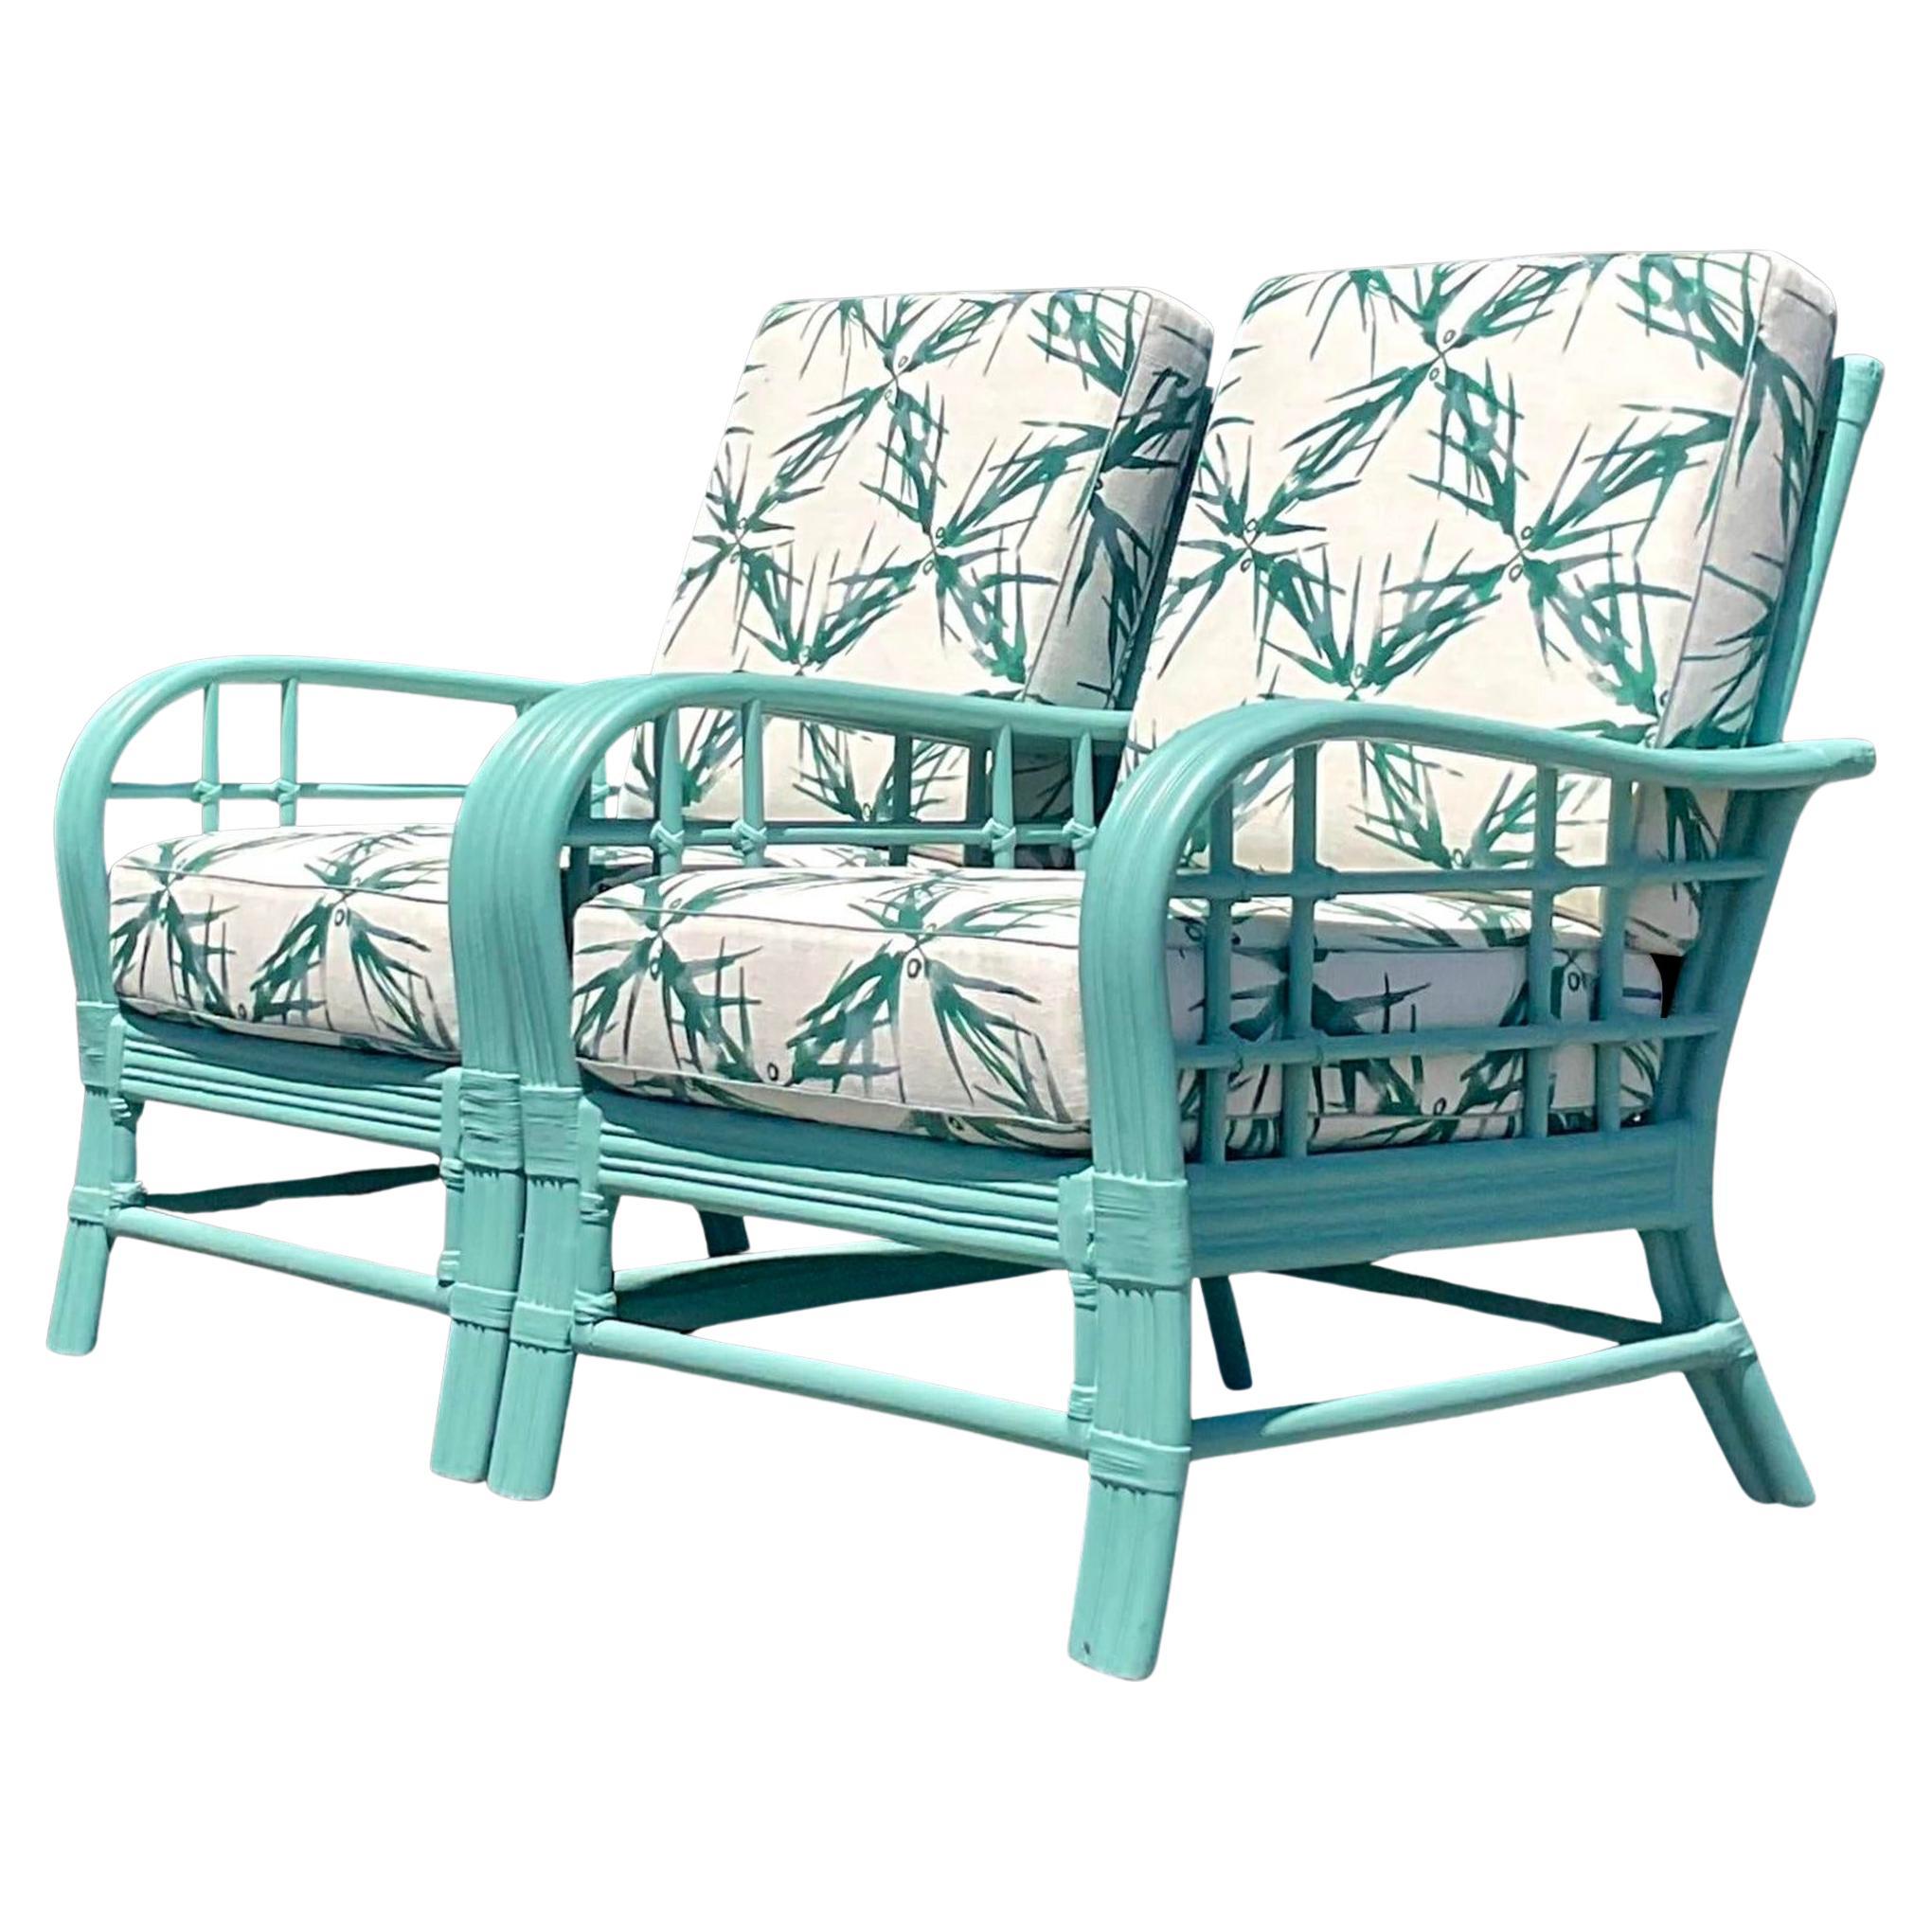 Vintage Coastal Painted Bent Rattan Lounge Chairs - a Pair For Sale